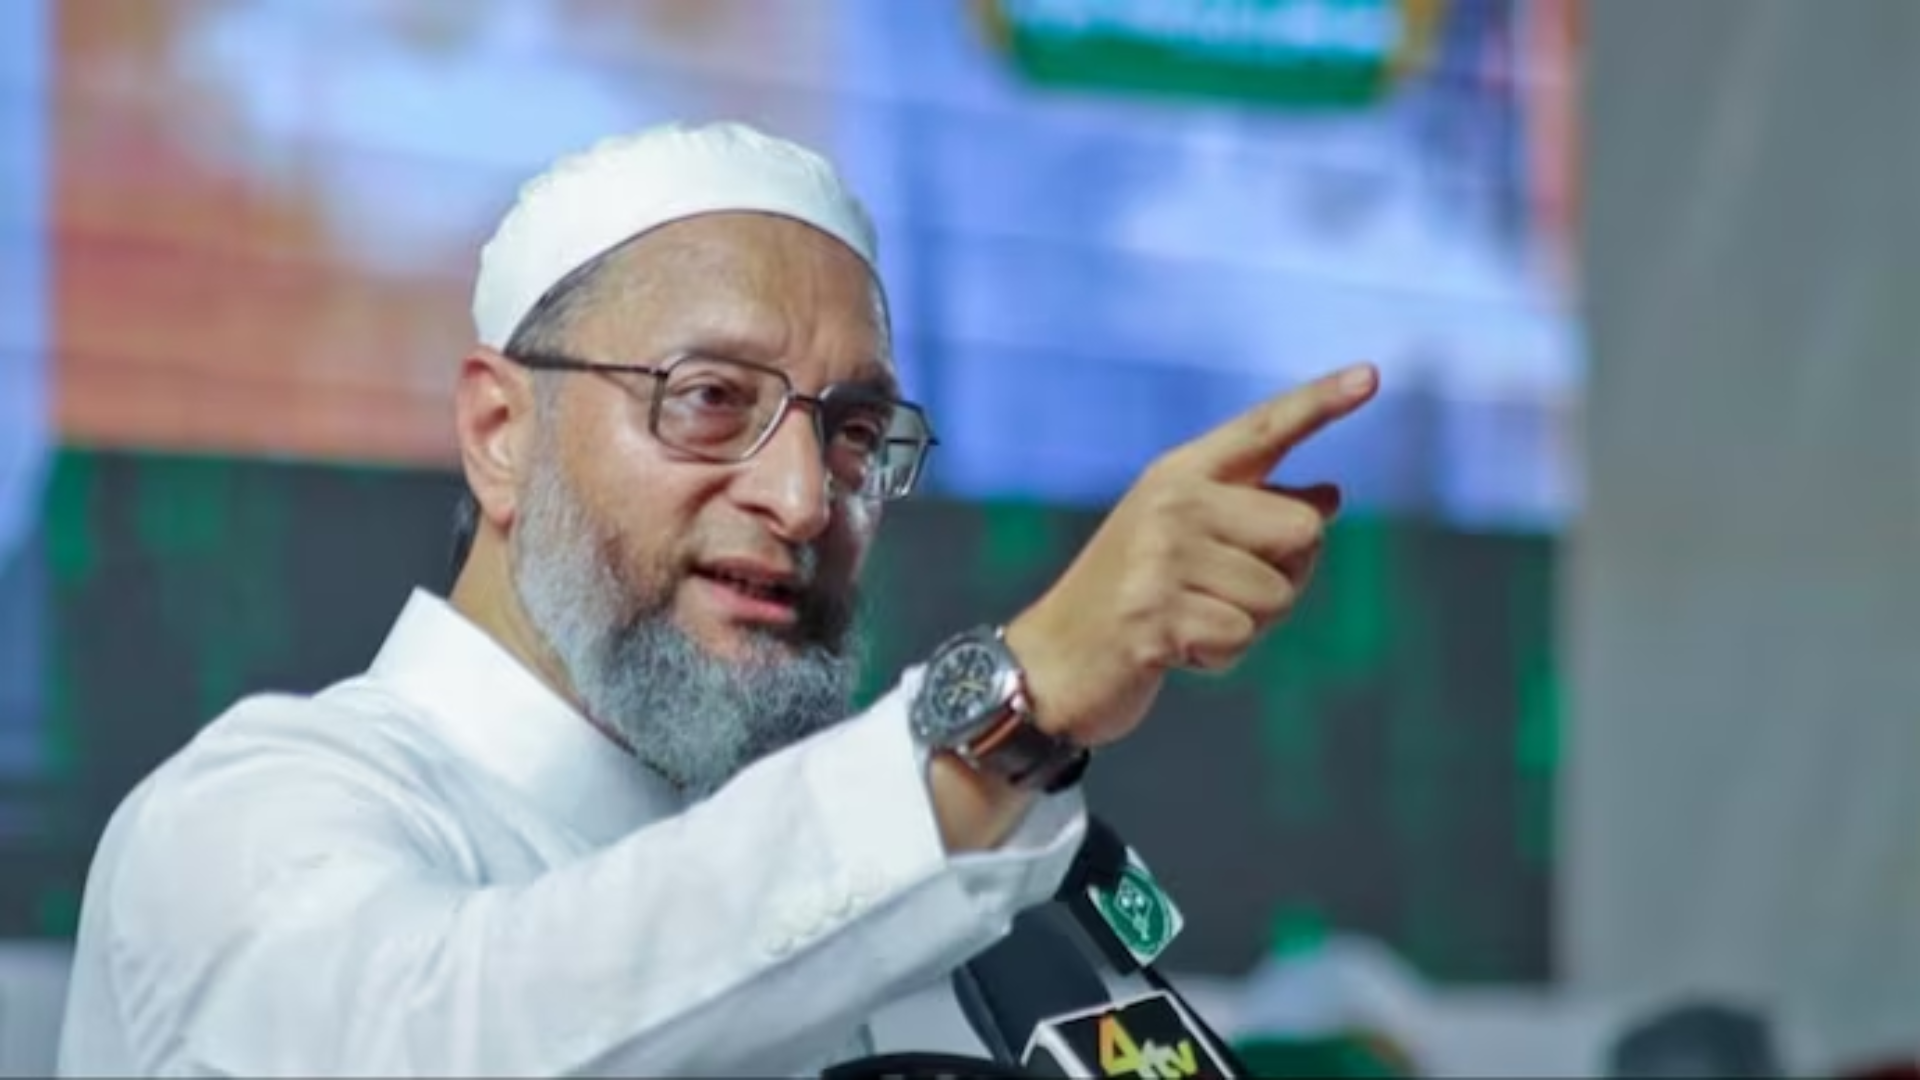 “Condoms Frequently Used By Muslims”: Asaduddin Owaisi Reacts On PM Modi’s ‘Zada Baccha’ Remarks